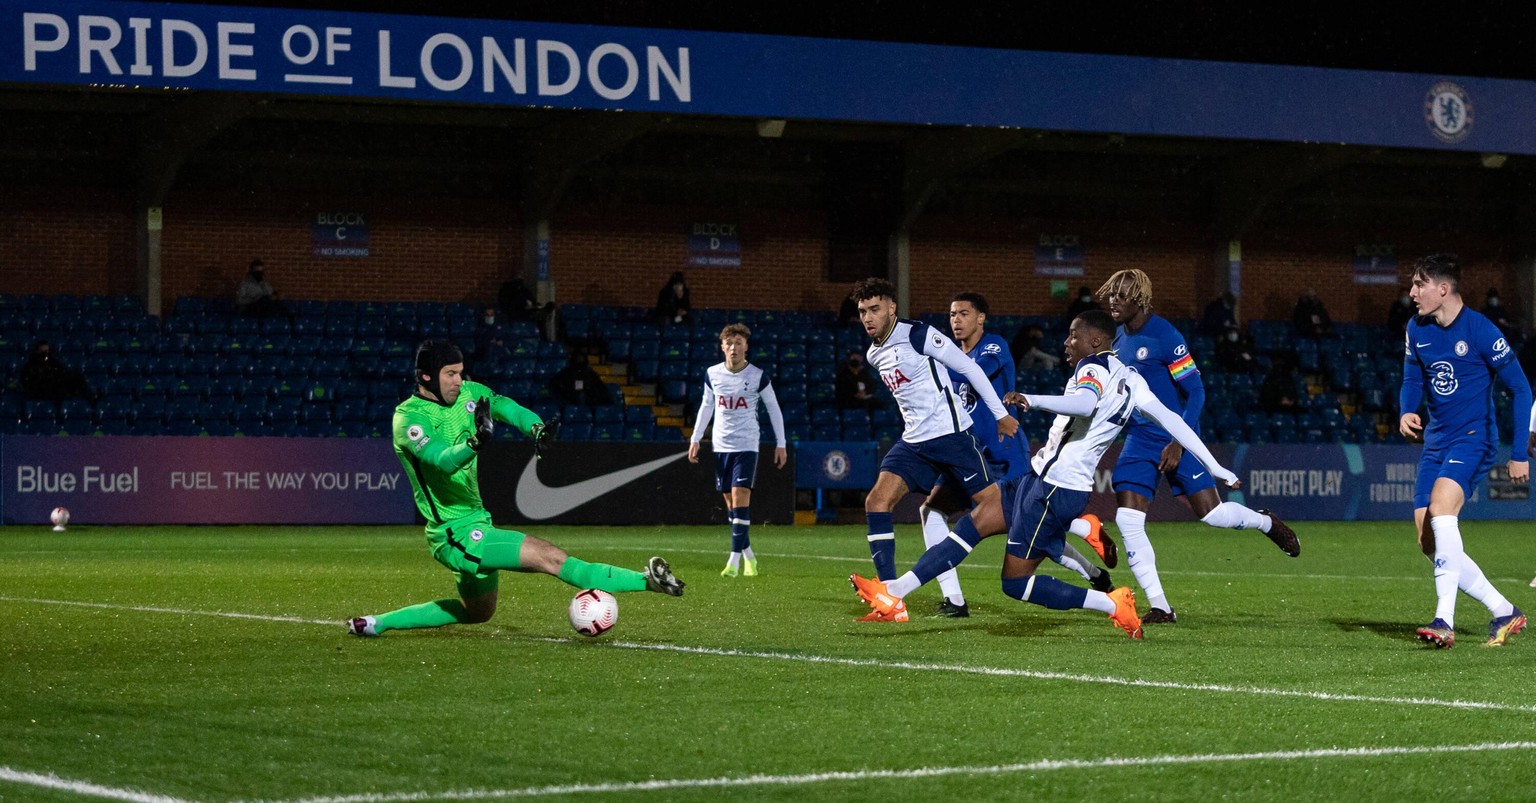 JUBRILL OKEDINA of Spurs scores the first goal past Goalkeeper Petr Cech of Chelsea U23 during the Premier League 2 match between Chelsea U23 and Tottenham Hotspur U23 at the Kingsmeadow Stadium, King ...